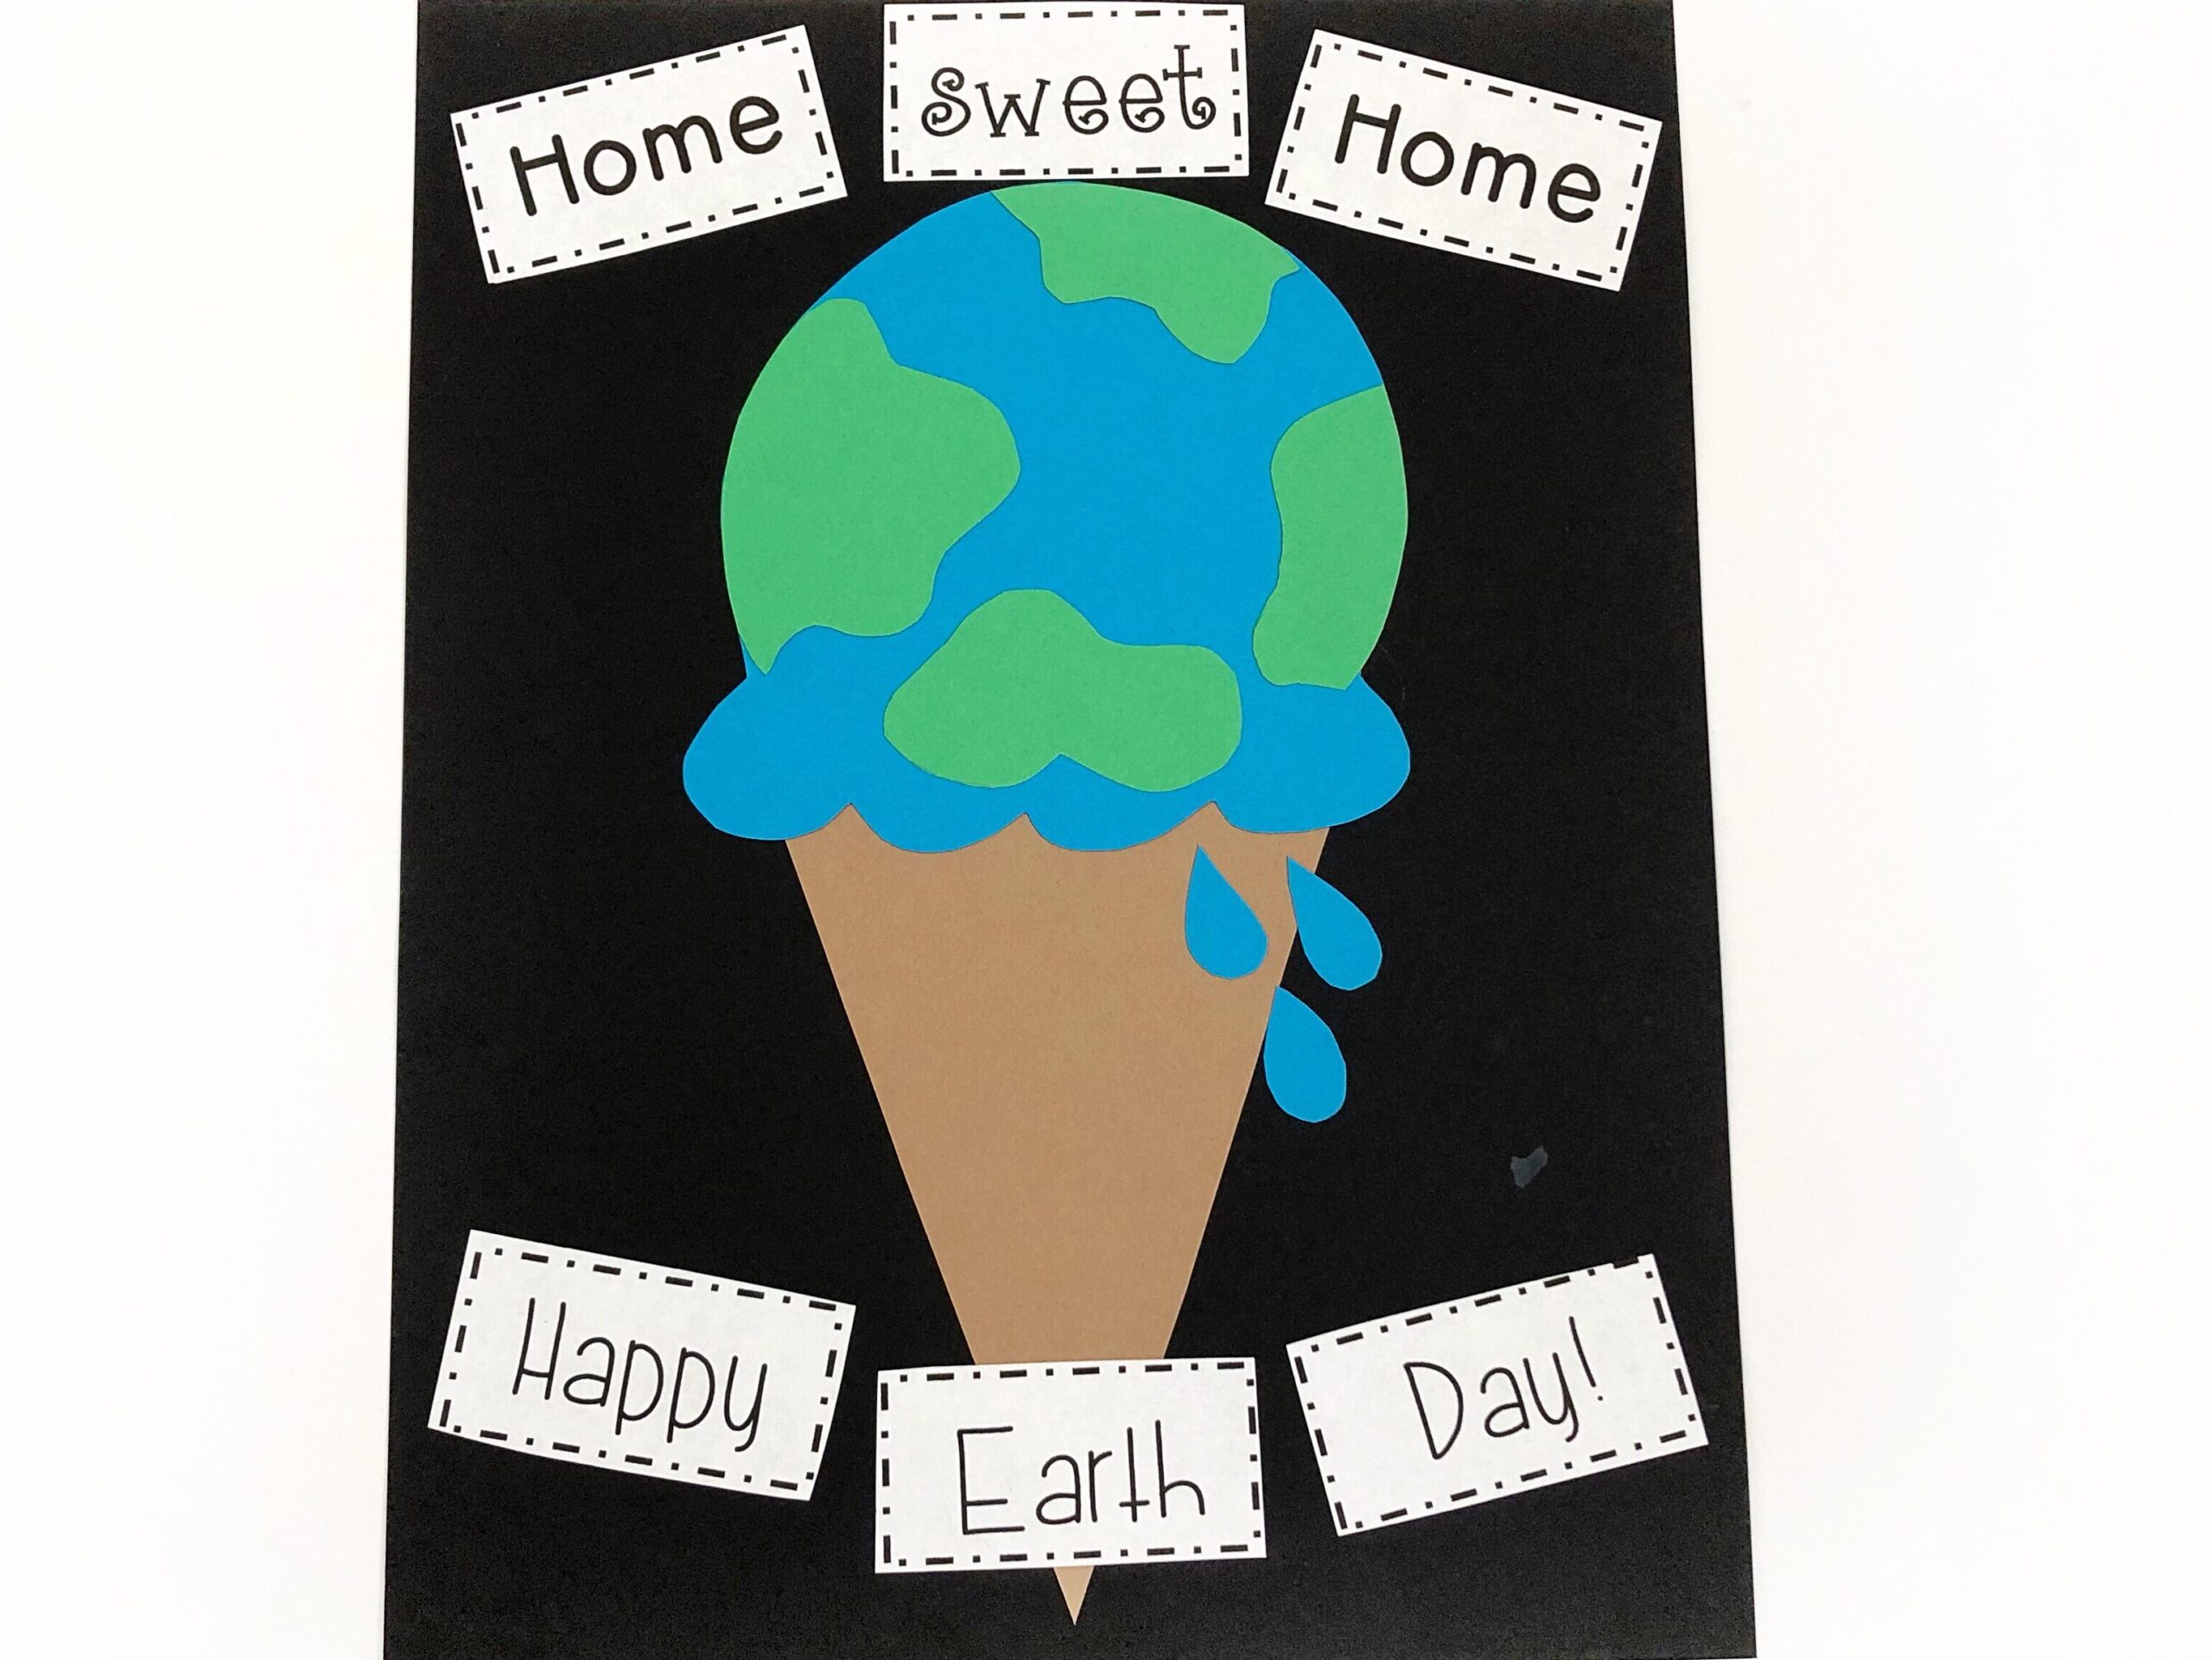 Paper craft with ice cream cone decorated to look like an Earth.  Text on the craft says "Home Sweet Home.  Happy Earth Day!"